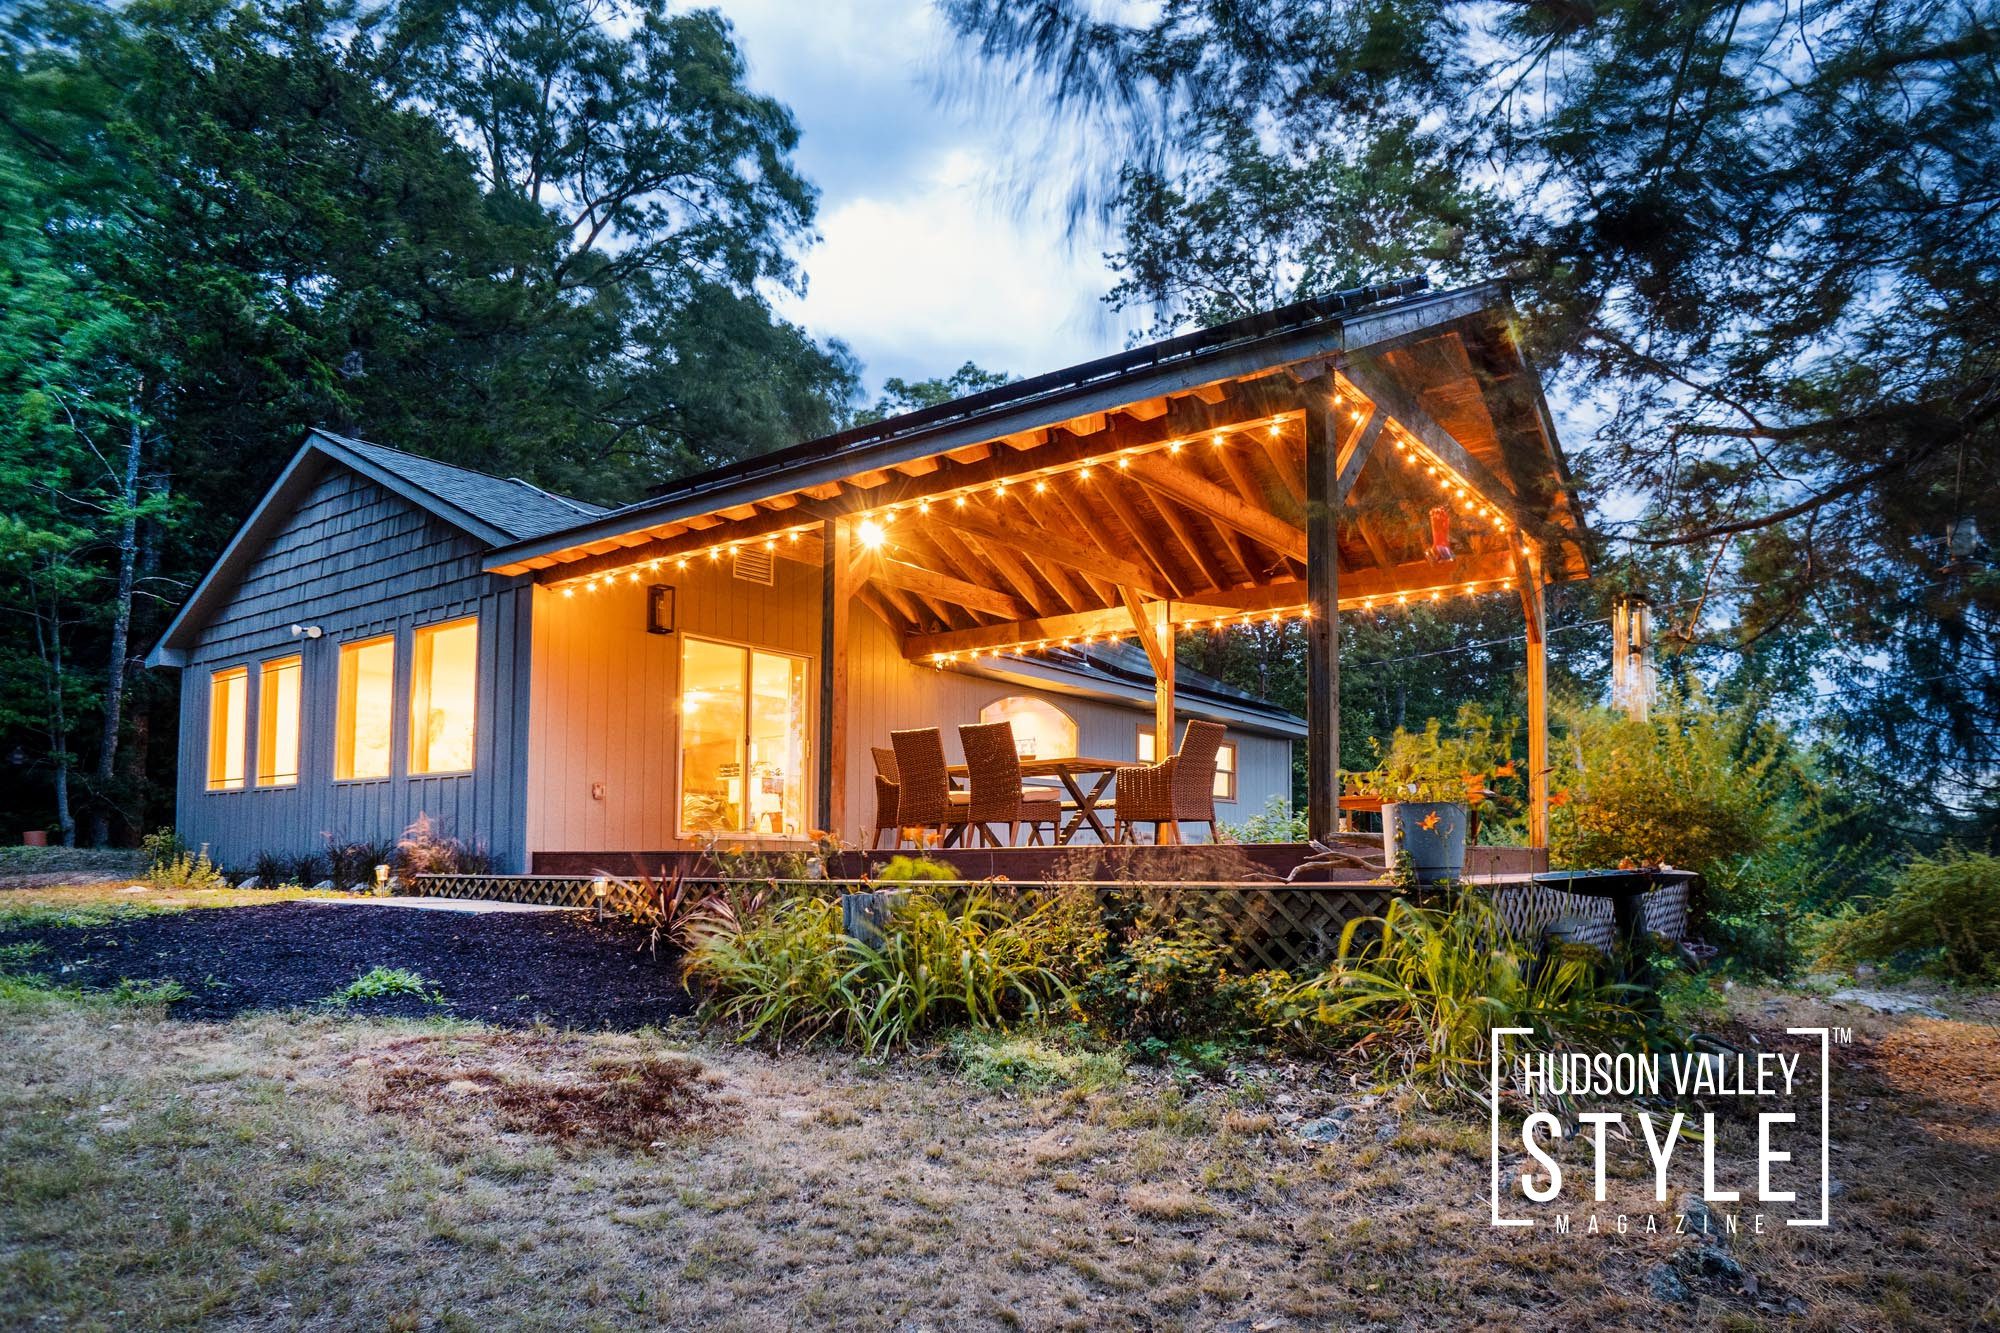 Discover The Secluded Mountaintop Getaway: A Modern Rustic Cabin in the Hudson Valley – Presented by Alluvion Vacations